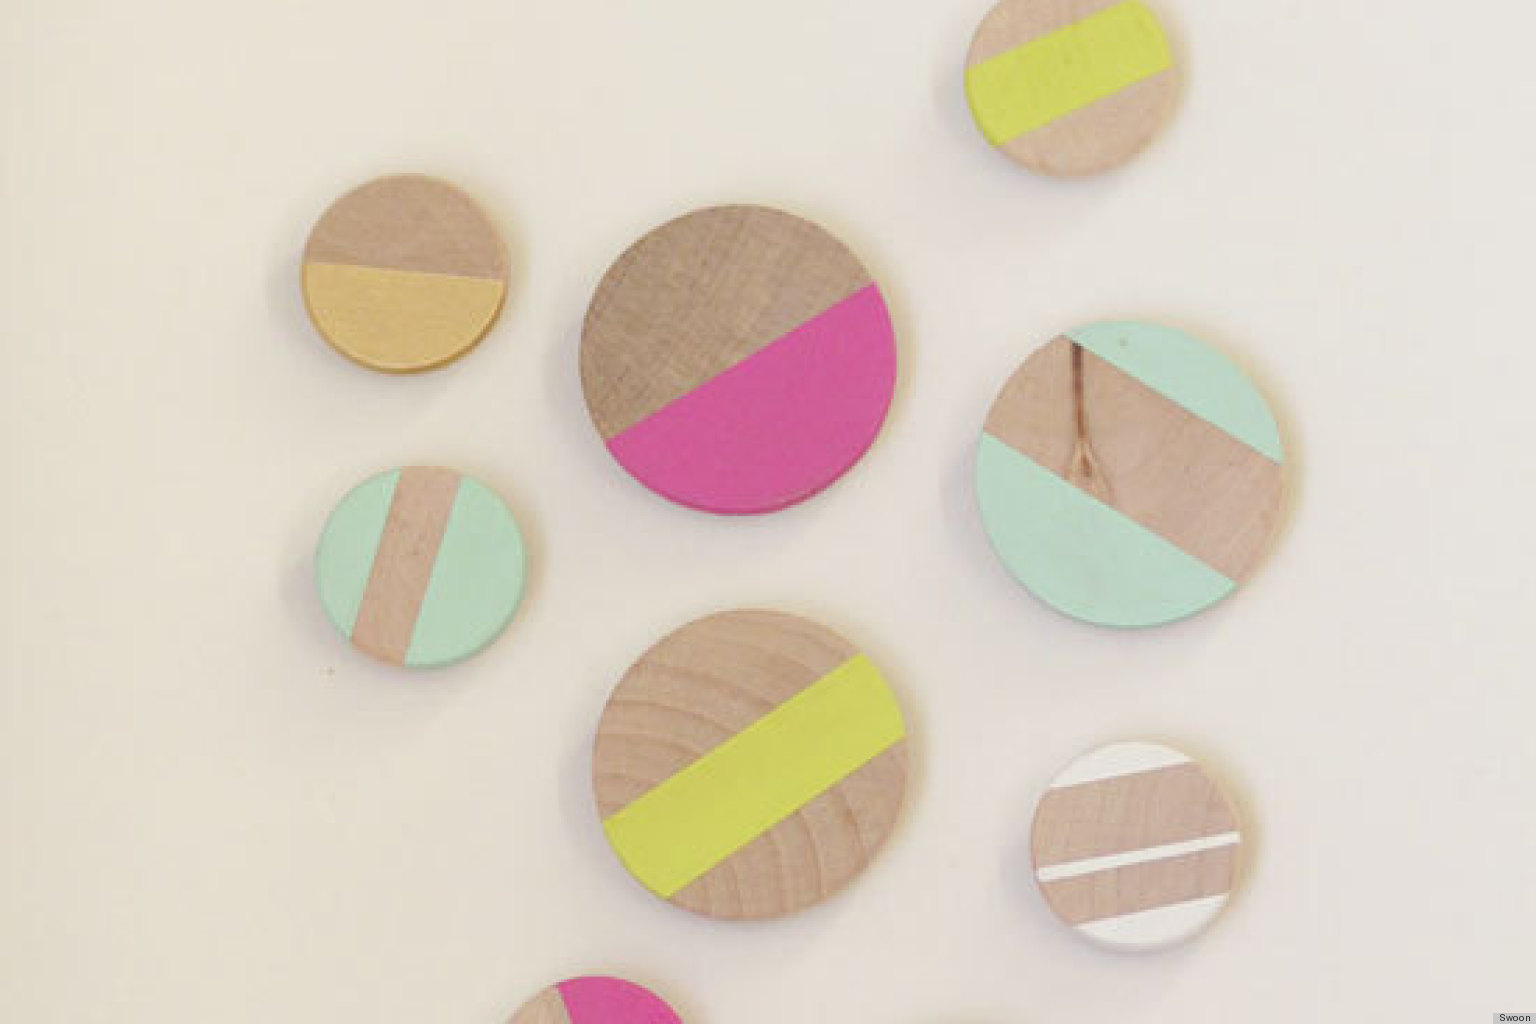 Craft Of The Day: Create Wood Magnets With A Touch Of Neon | HuffPost